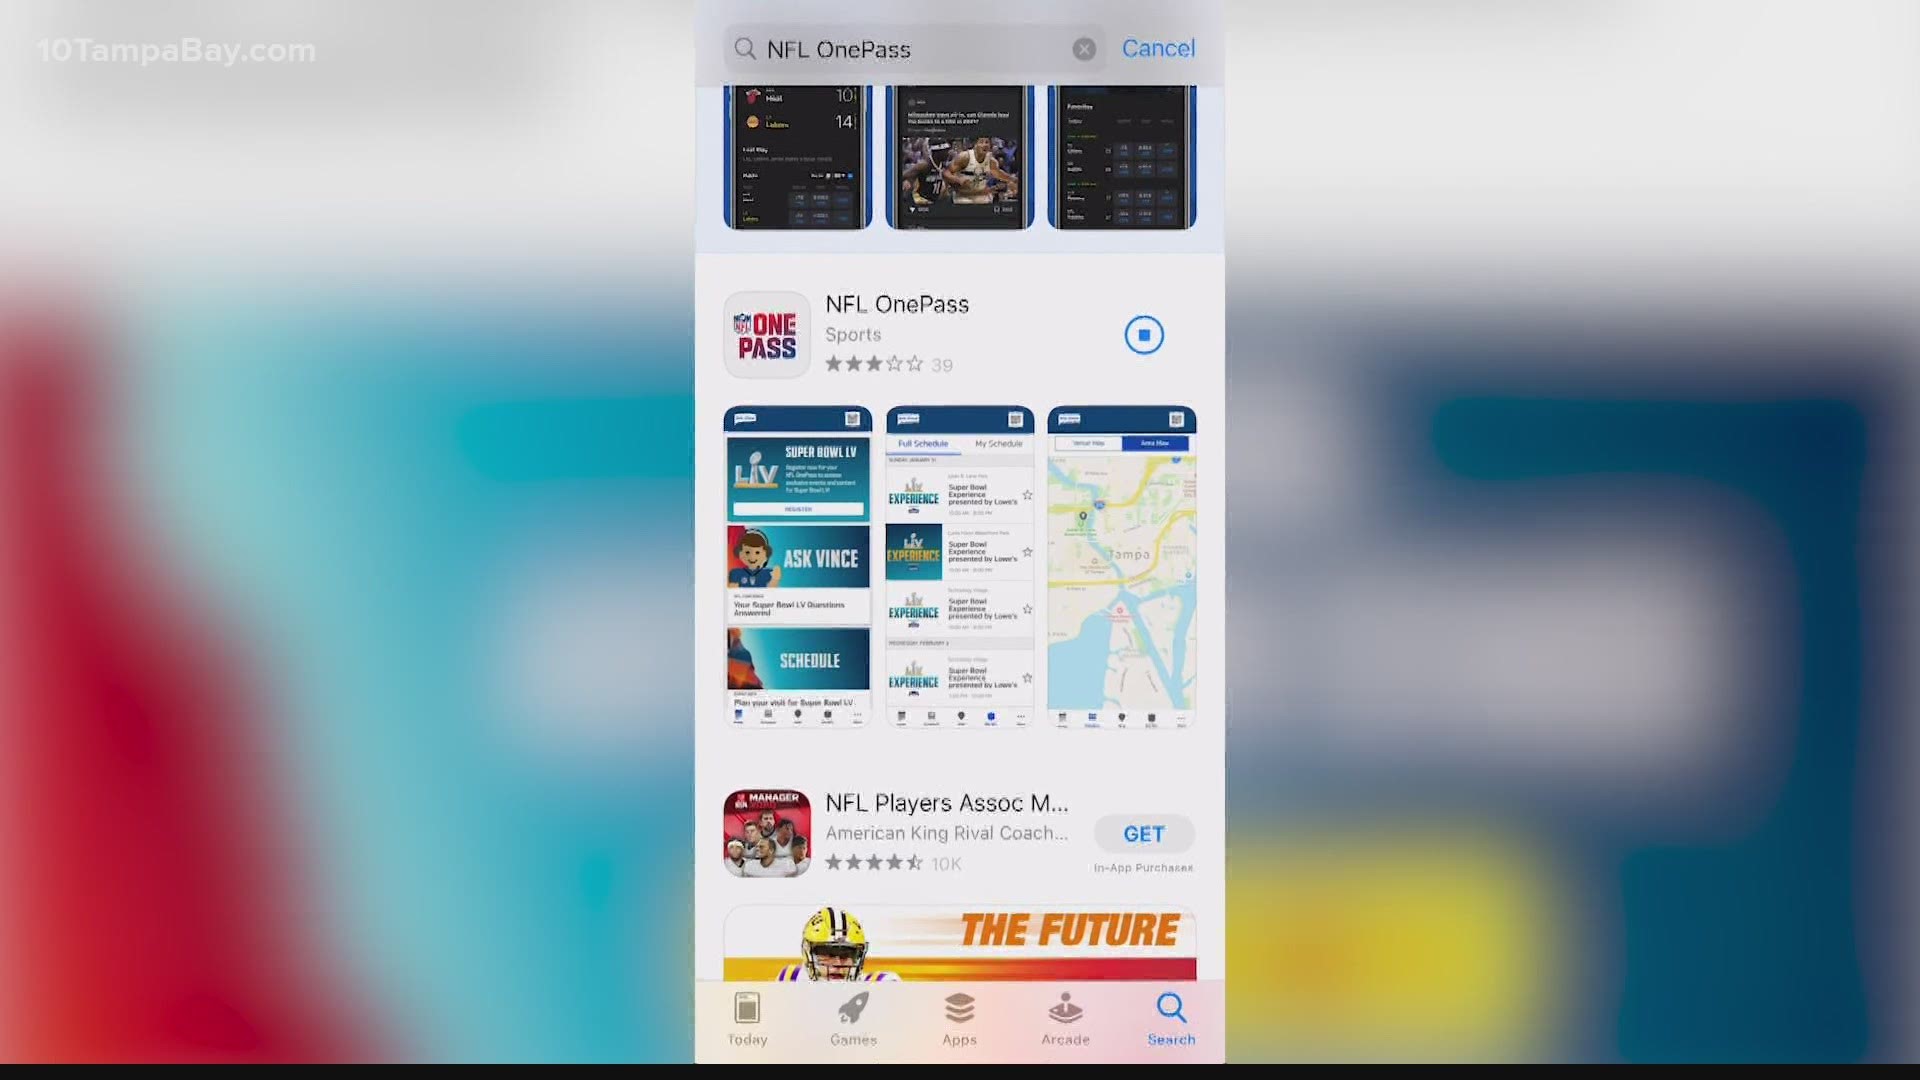 Fans will download the app to reserve free tickets for the Super Bowl Experience in Tampa.